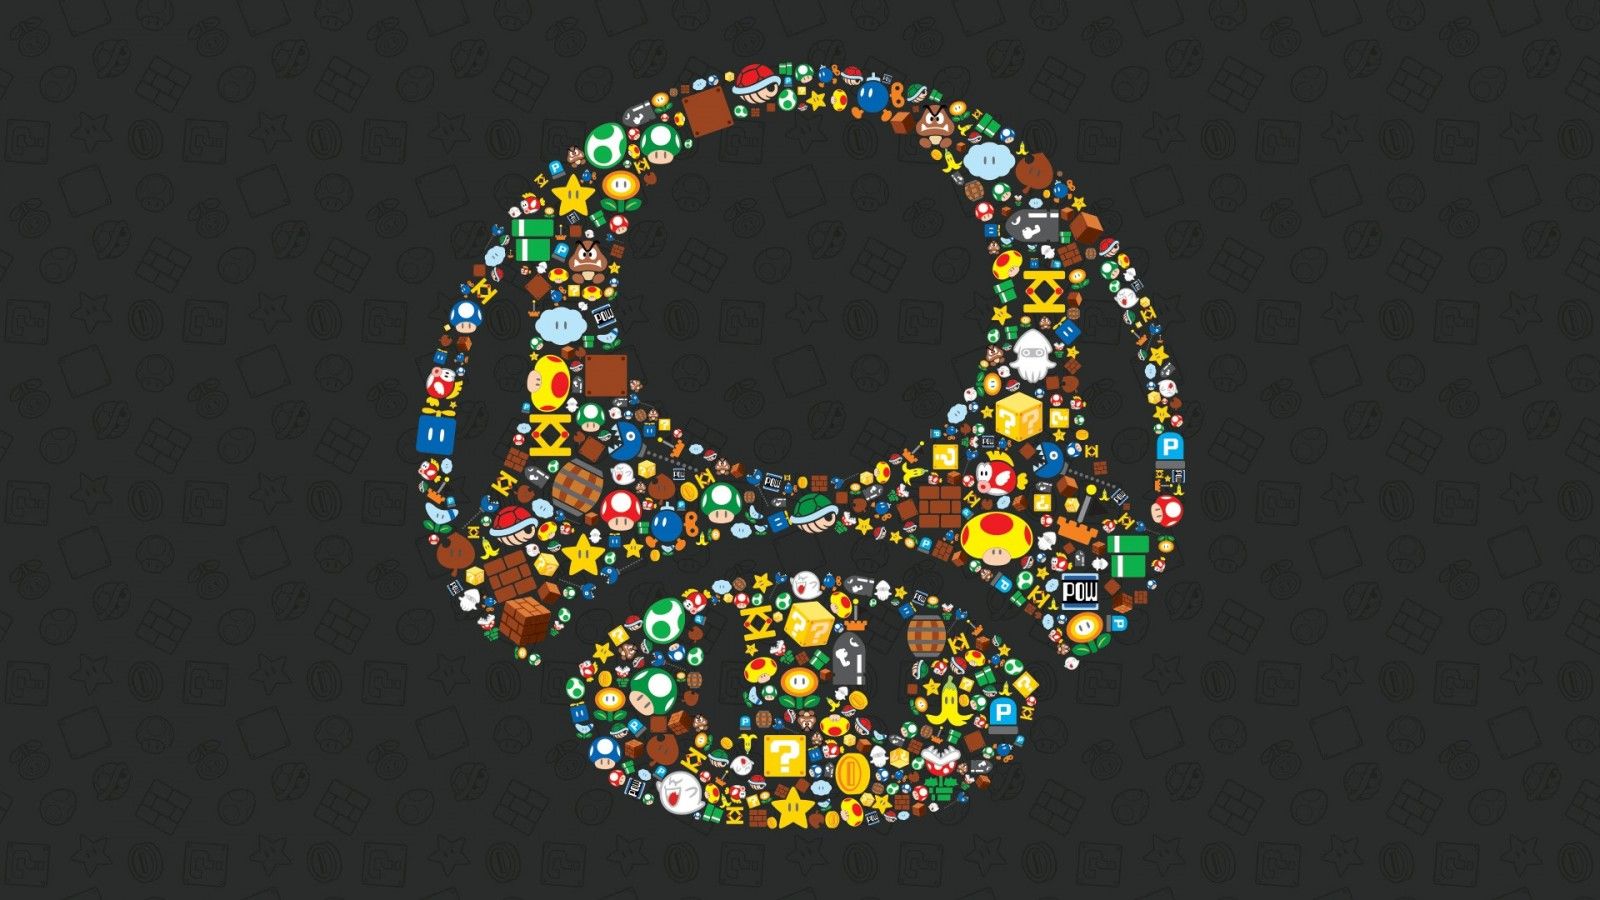 Wallpaper, video games, window, collage, spiral, symmetry, glass, pattern, circle, Nintendo, Mario Bros, Toad character, color, design, jewellery, earrings, number, fashion accessory 1920x1080